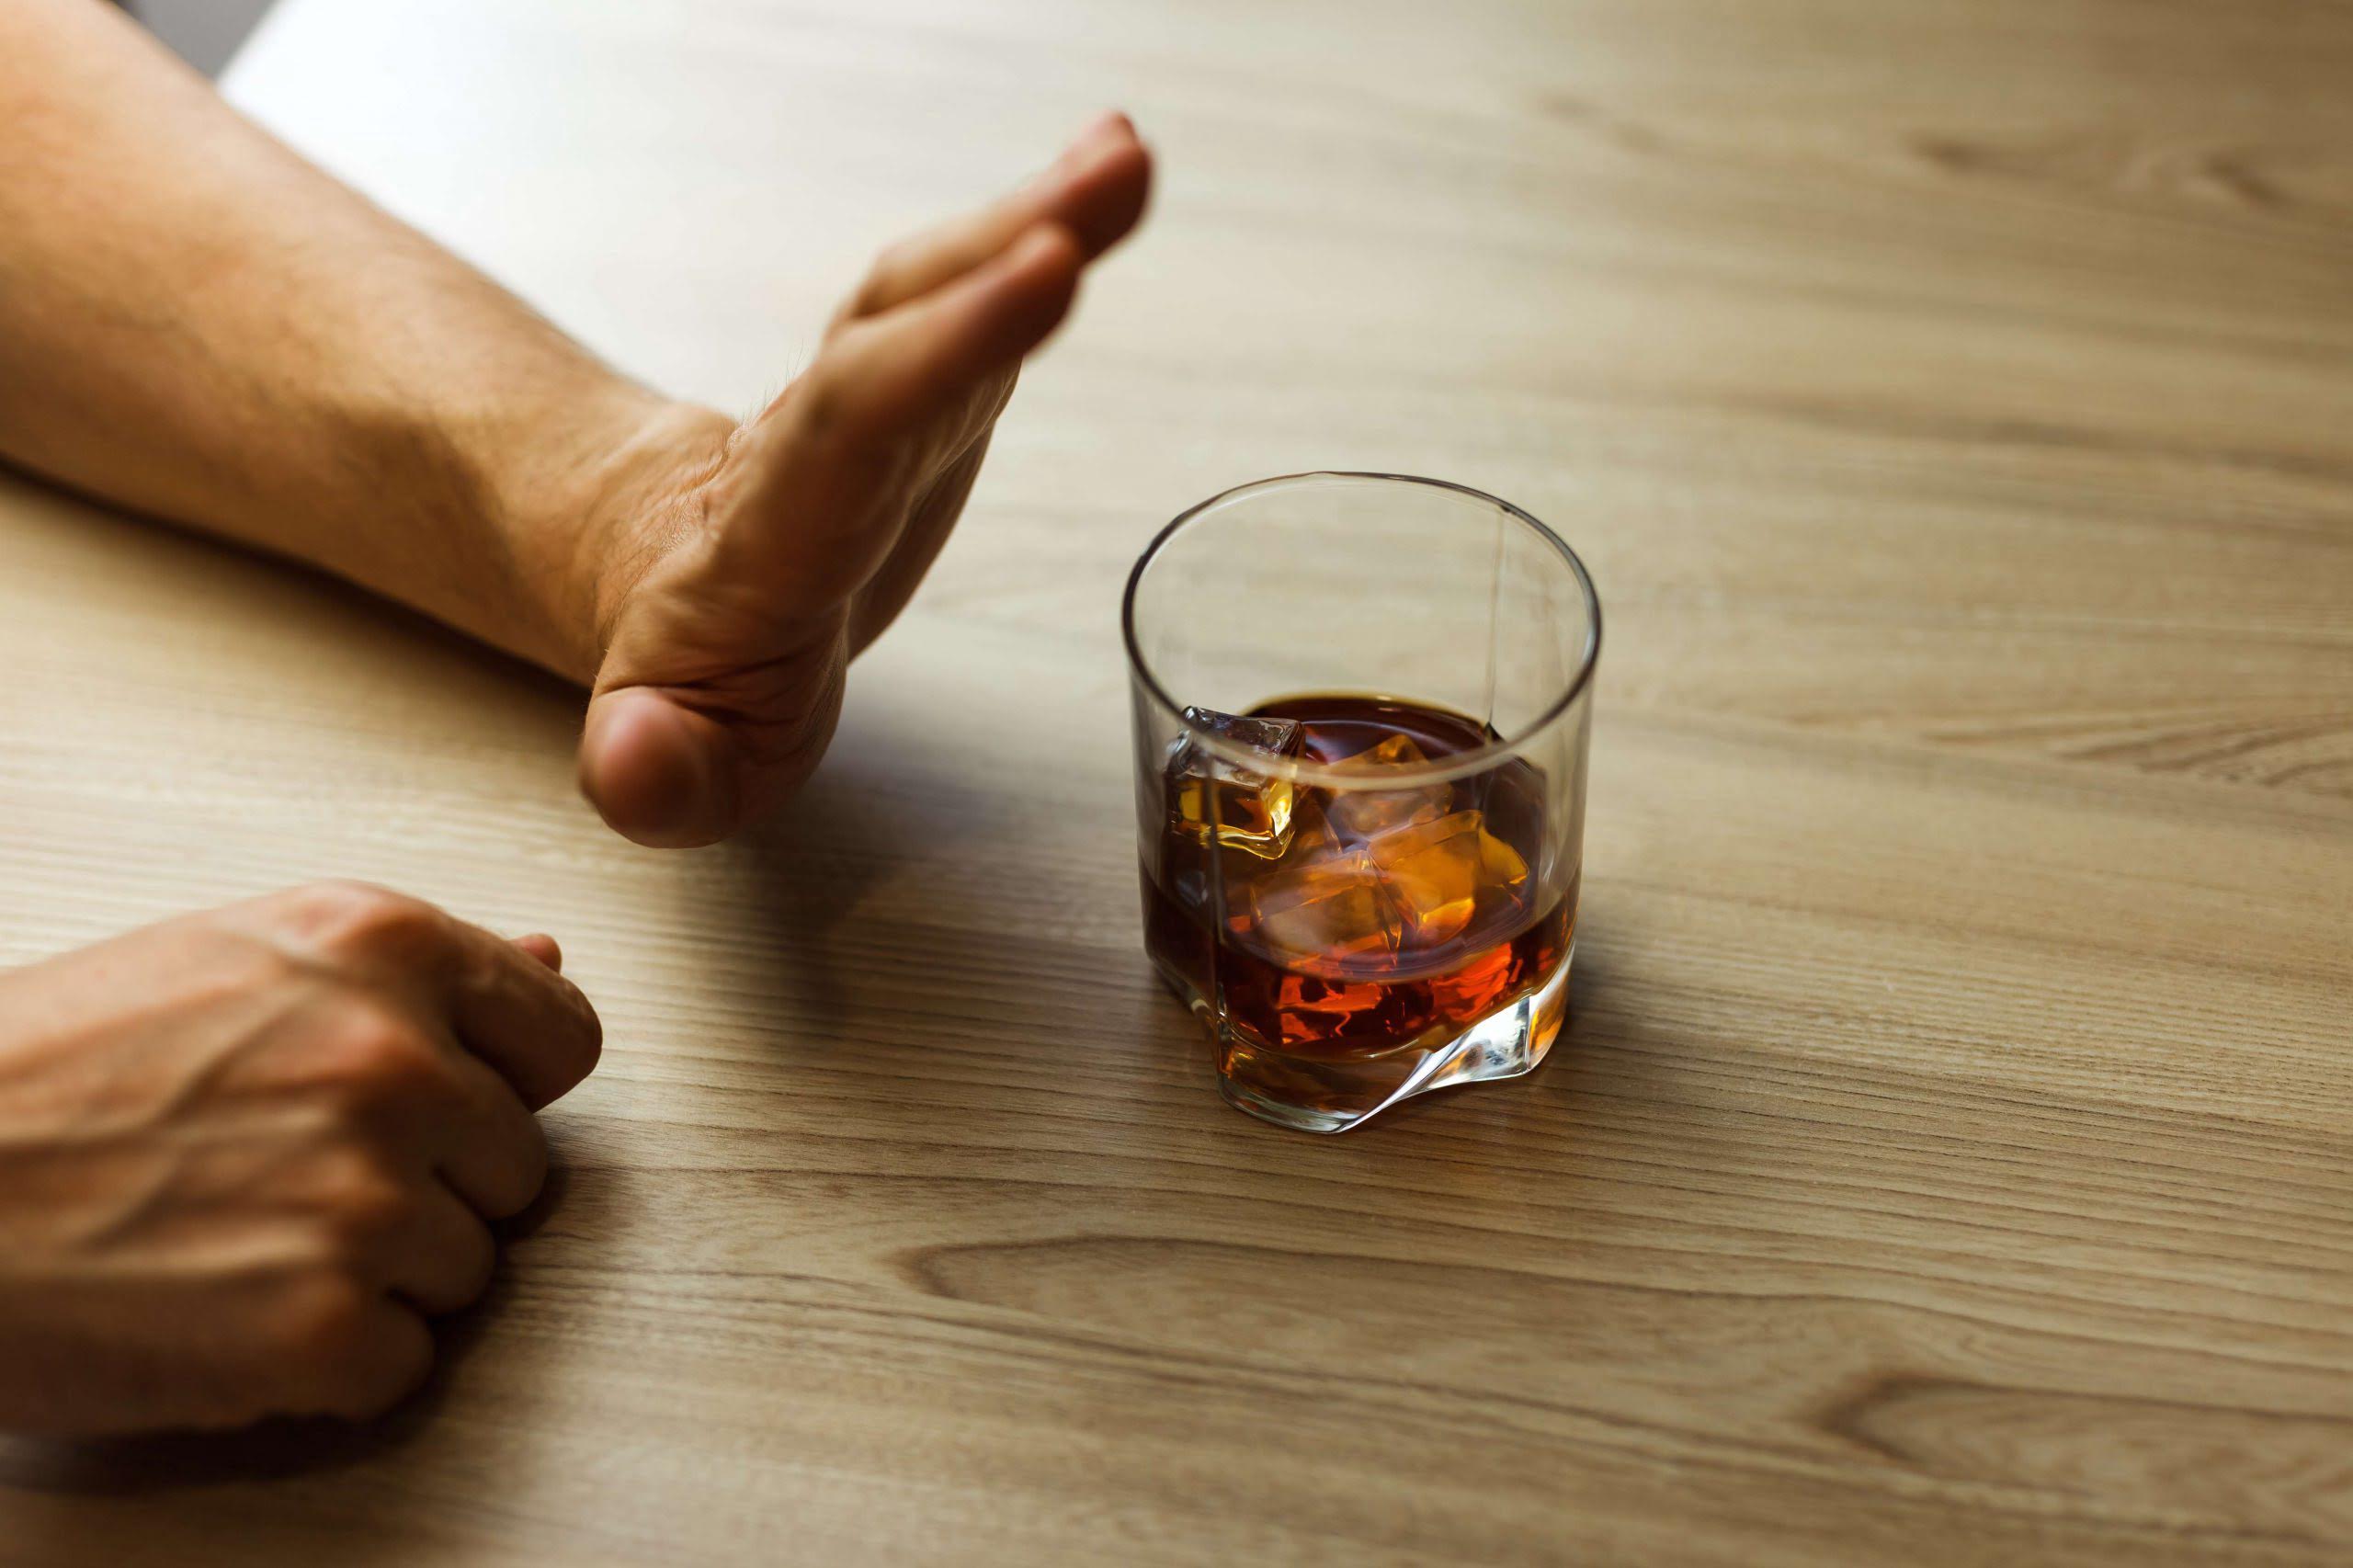 physical and psychological dependence on alcohol